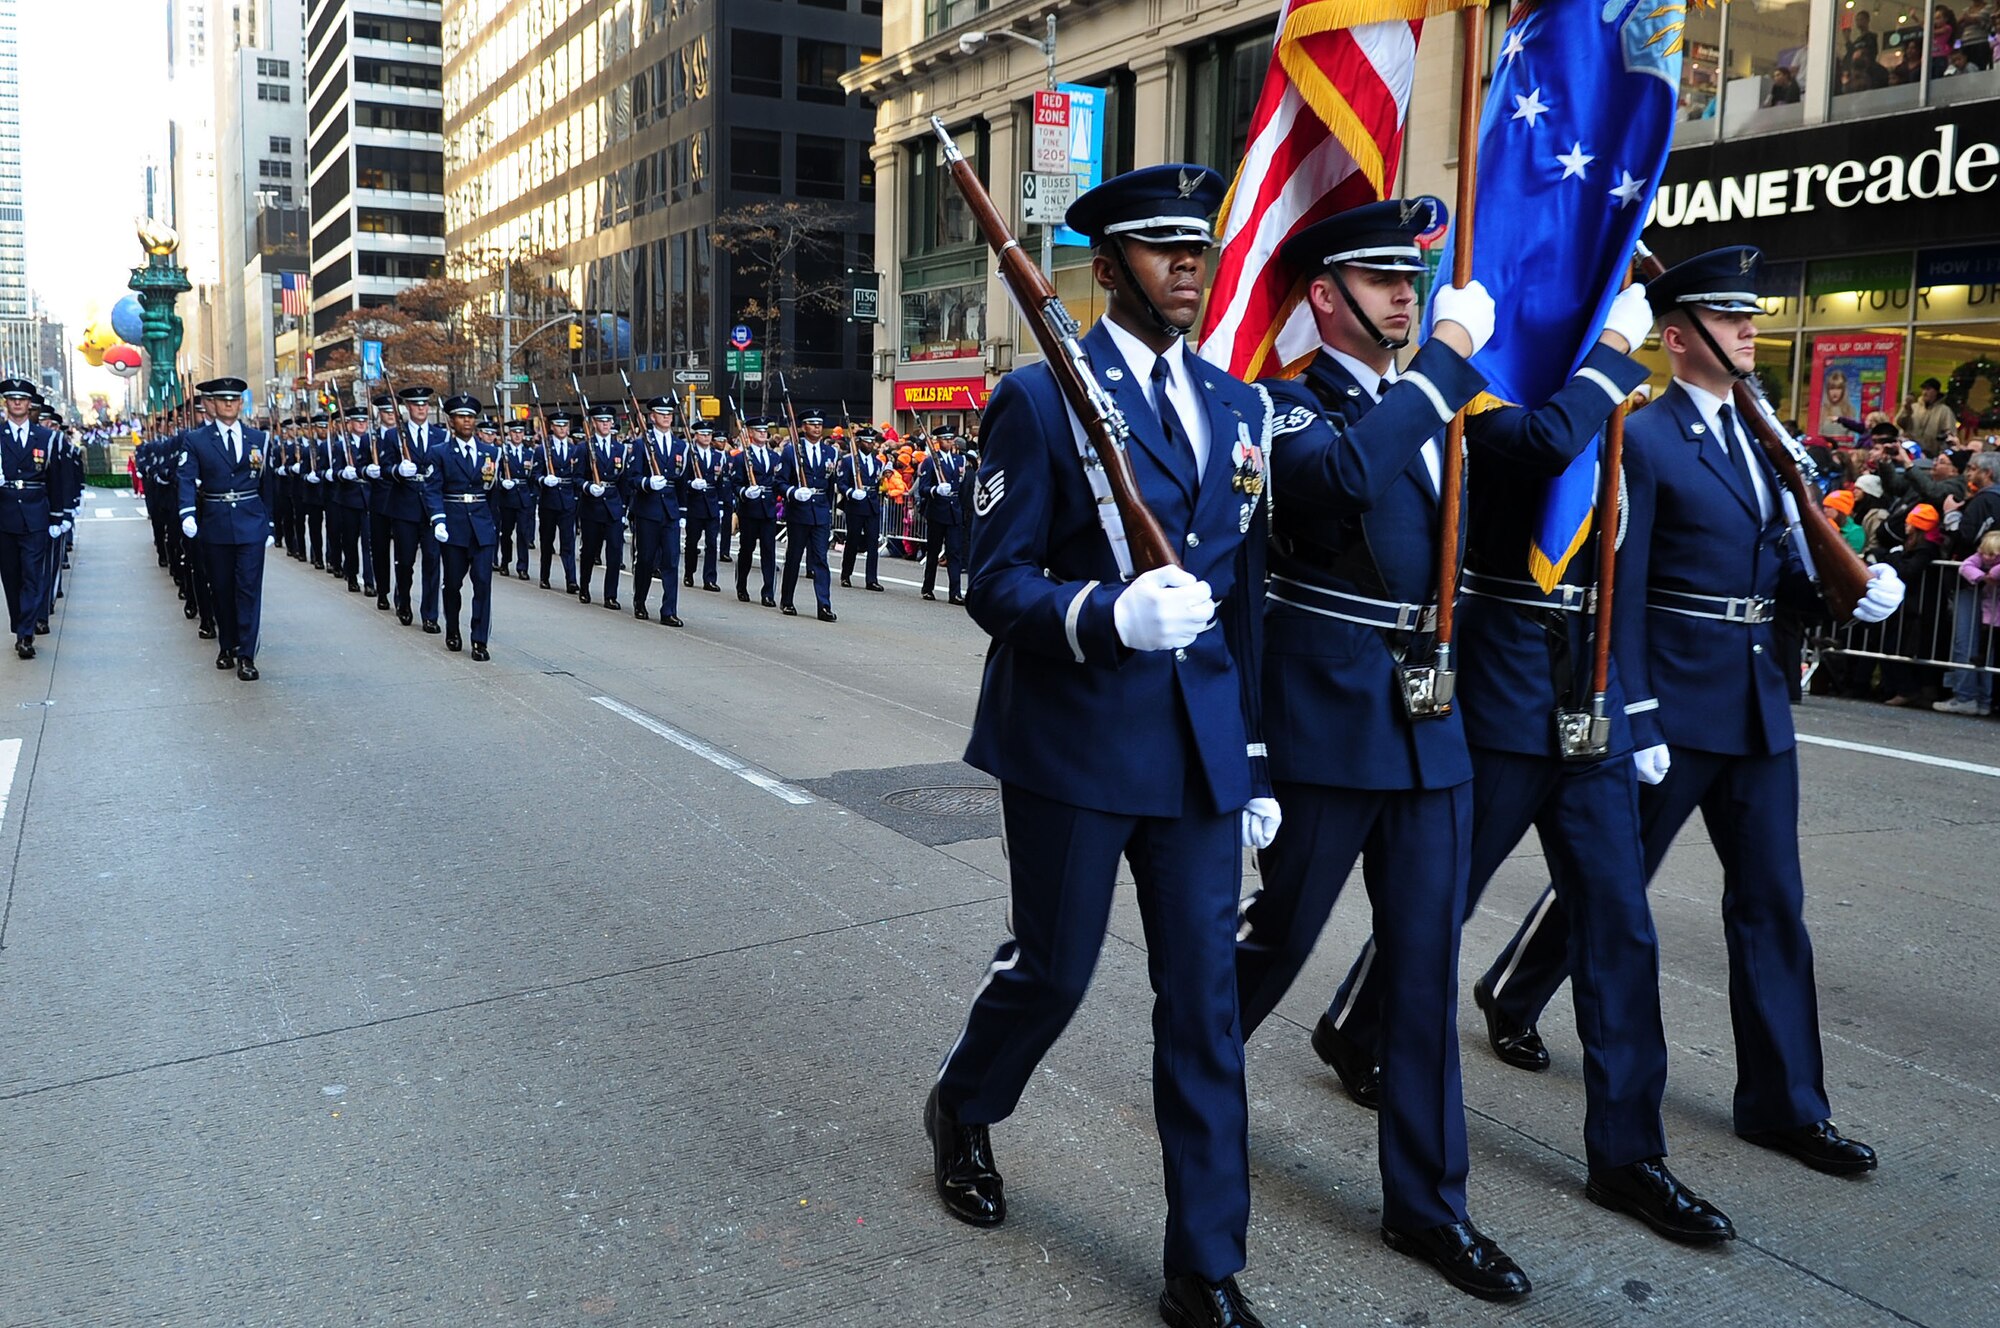 U.S. Air Force Honor Guard Colors Team members lead ceremonial guardsmen during the 86th Annual Macy?s Thanksgiving Day Parade, 2012, in New York City. The USAF Honor Guard and Band made history when they set foot in the city for the largest deployment of 11th Operations Group assets outside of the National Capital Region in support of the parade for the very first time. (U.S. Air Force photo by Senior Airman Steele C. G. Britton)